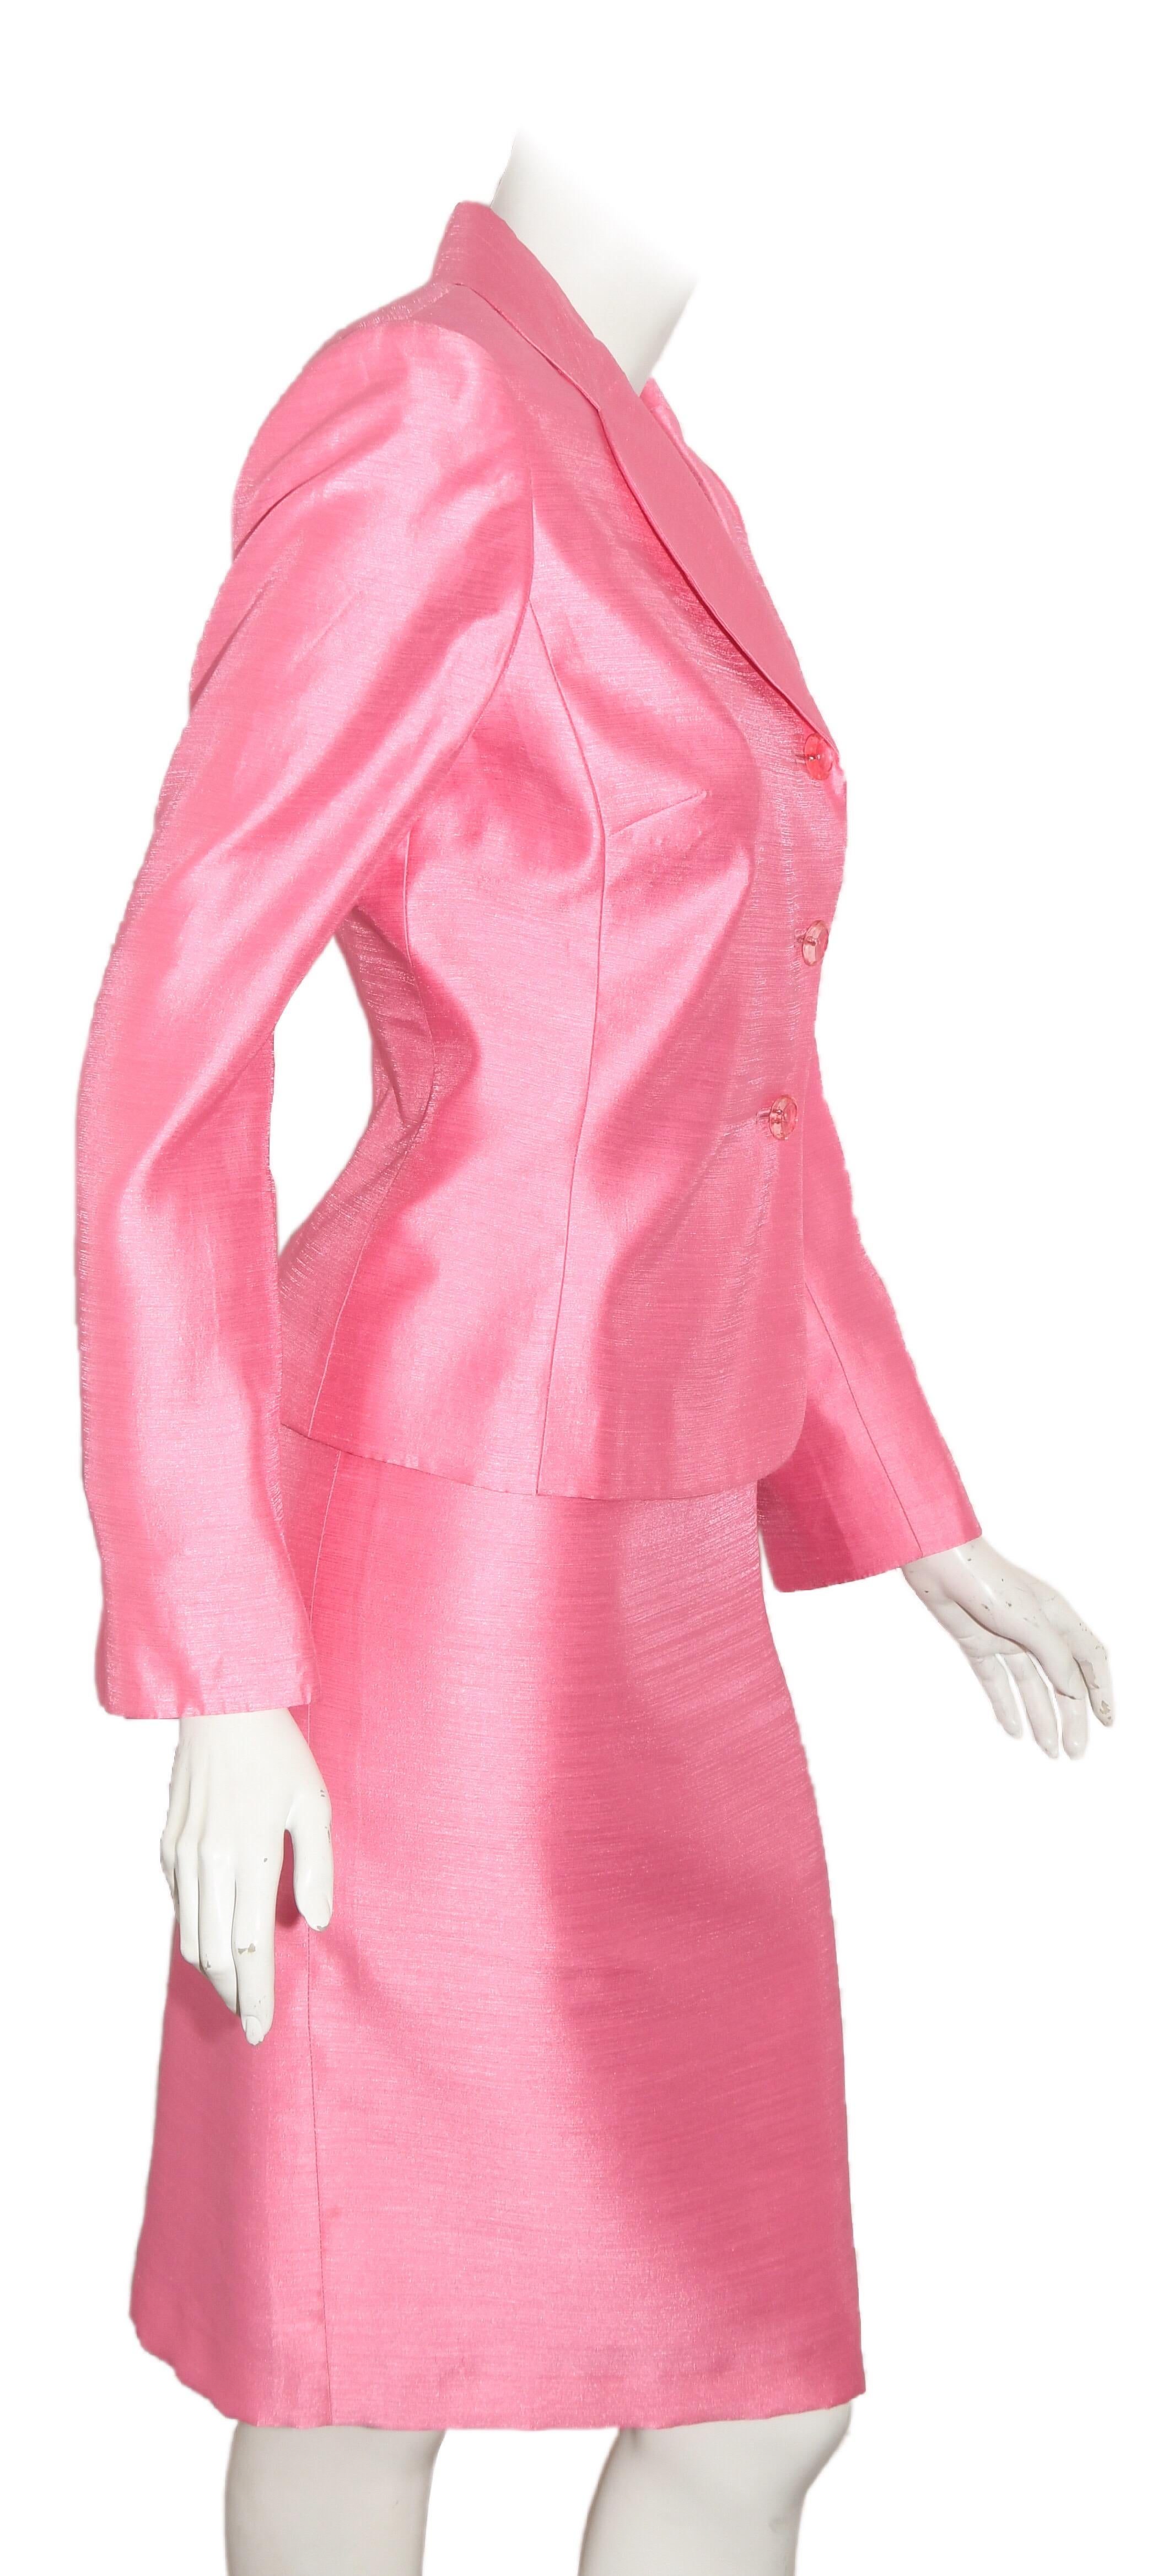 Prada springs forward in this pink skirt suit with rounded notch collar that includes three translucent buttons at front for closure. This suit is fully lined, both the skirt and the jacket, in pink viscose.   The long sleeves have a slit vent at